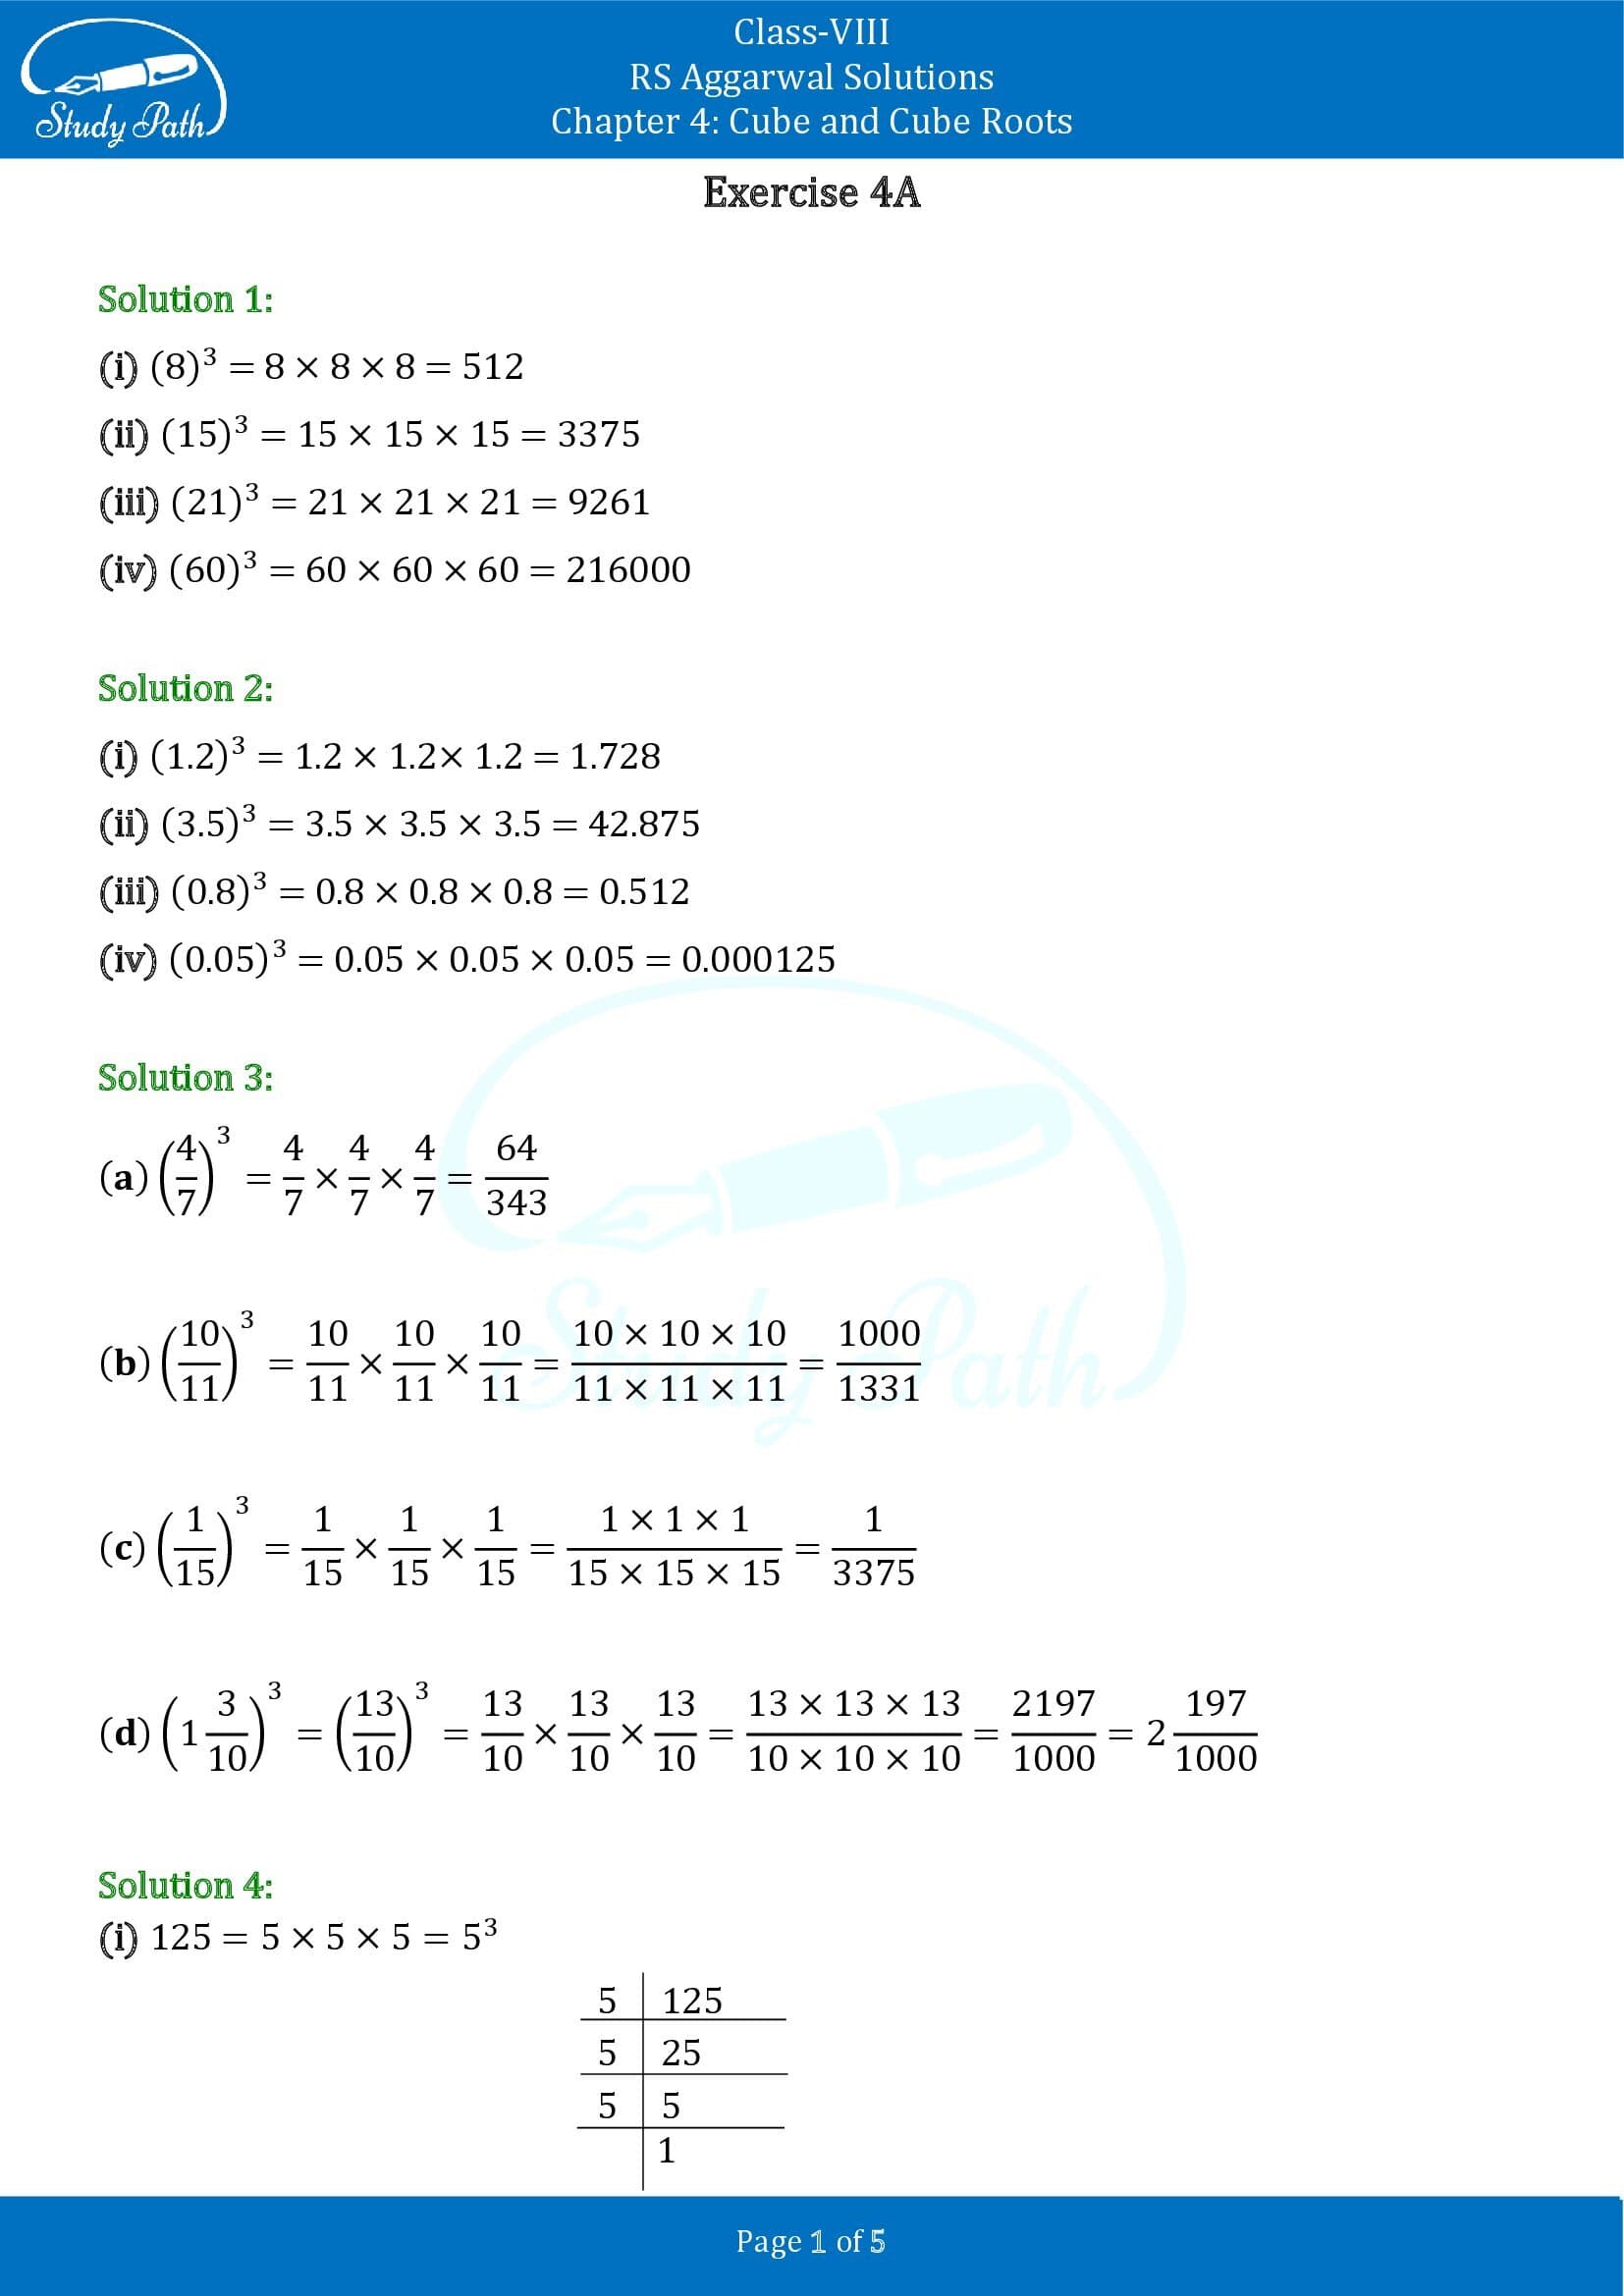 RS Aggarwal Solutions Class 8 Chapter 4 Cube and Cube Roots Exercise 4A 00001